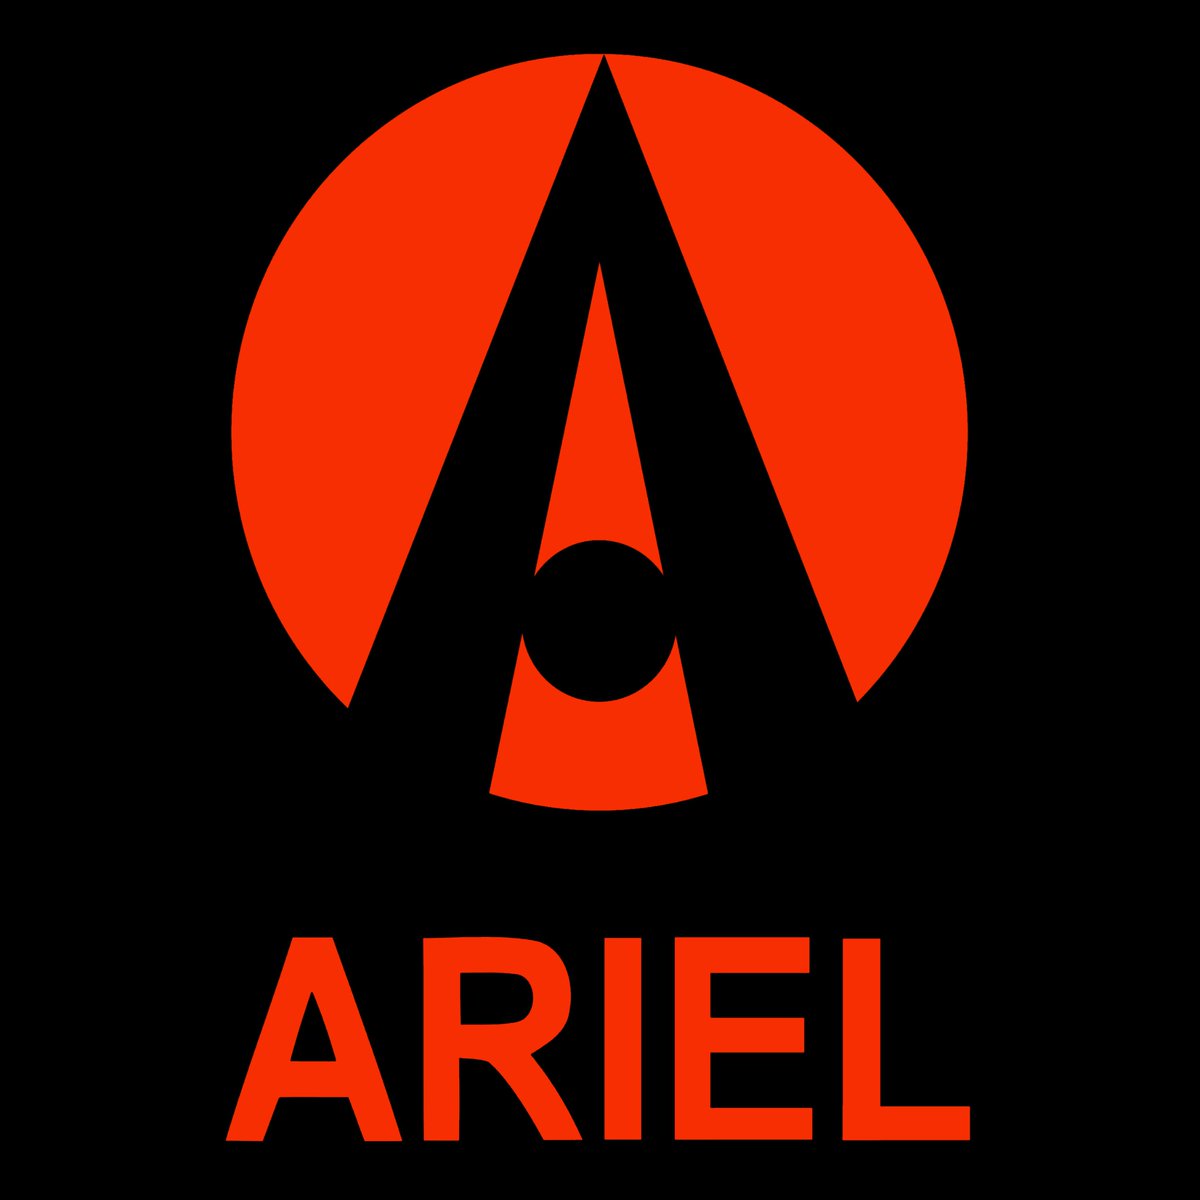 THE HISTORY OF THE ARIEL MOTOR COMPANY We'll be dealing with its Birth, Rebirth, Success and Growth as a brand.A Thread 